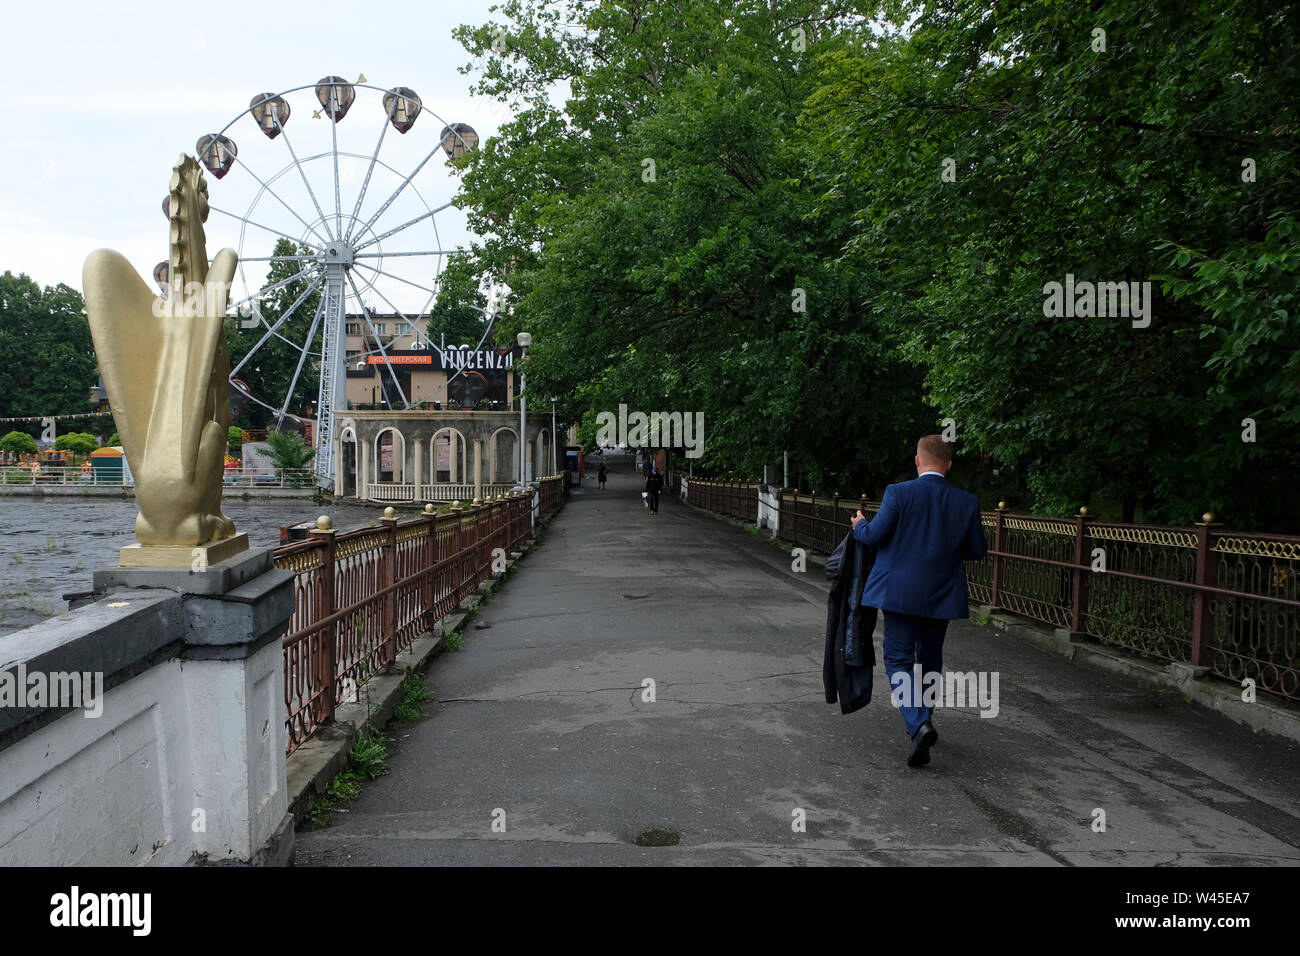 Pedestrians crossing Peshekhodnyy Most Grifonom bridge over Terek river in Vladikavkaz the capital city of the Republic of North Ossetia-Alania in the North Caucasian Federal District of Russia. Stock Photo